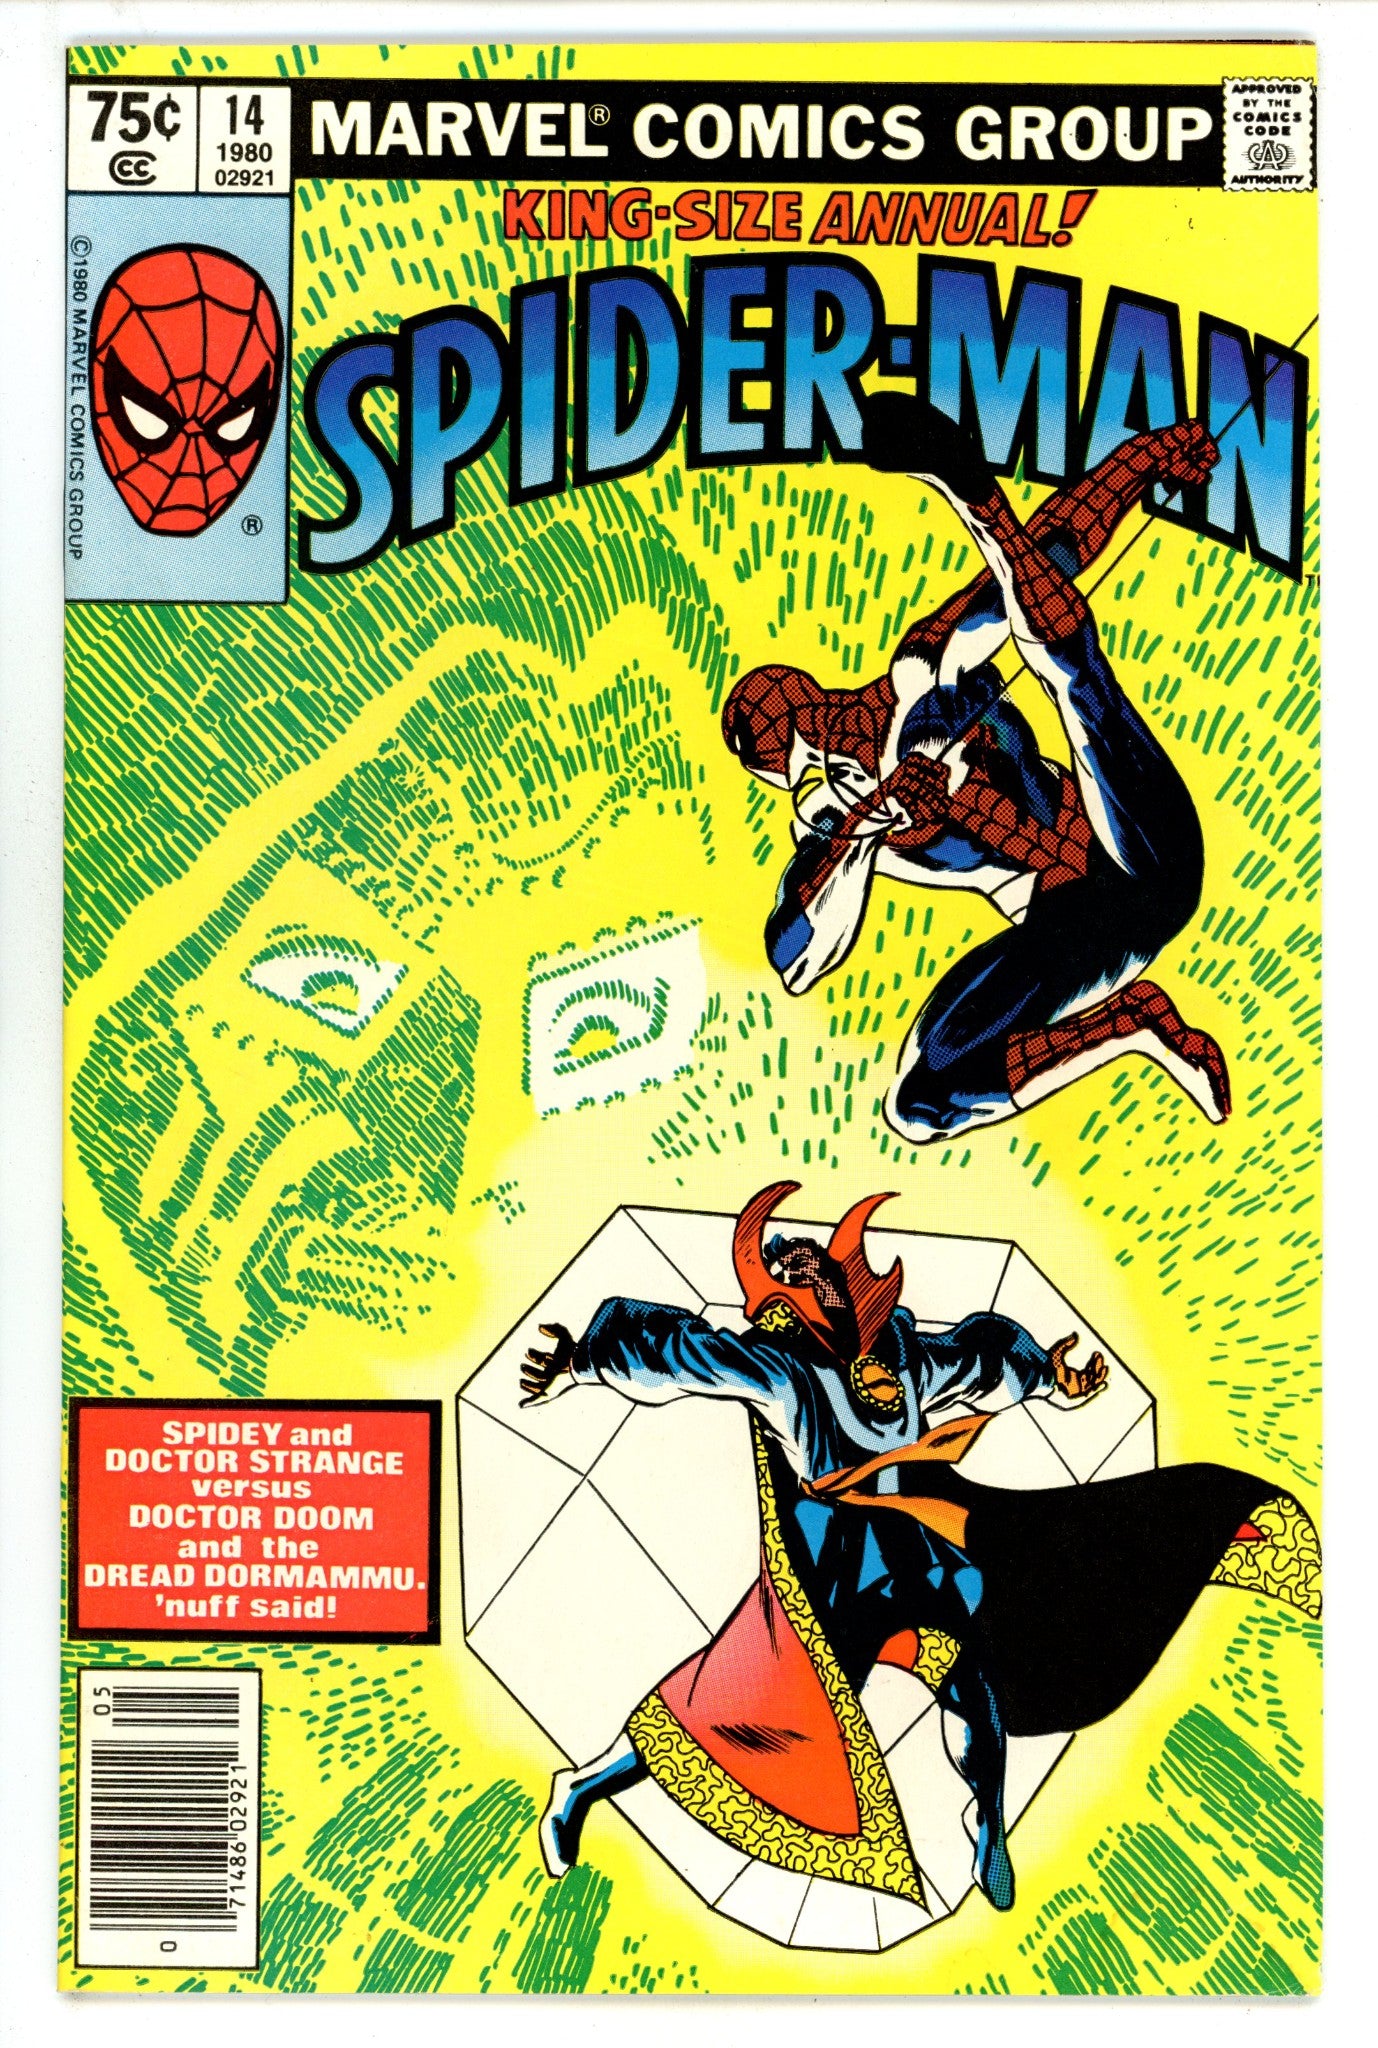 The Amazing Spider-Man Annual Vol 1 14 FN- (5.5) (1980) Newsstand 